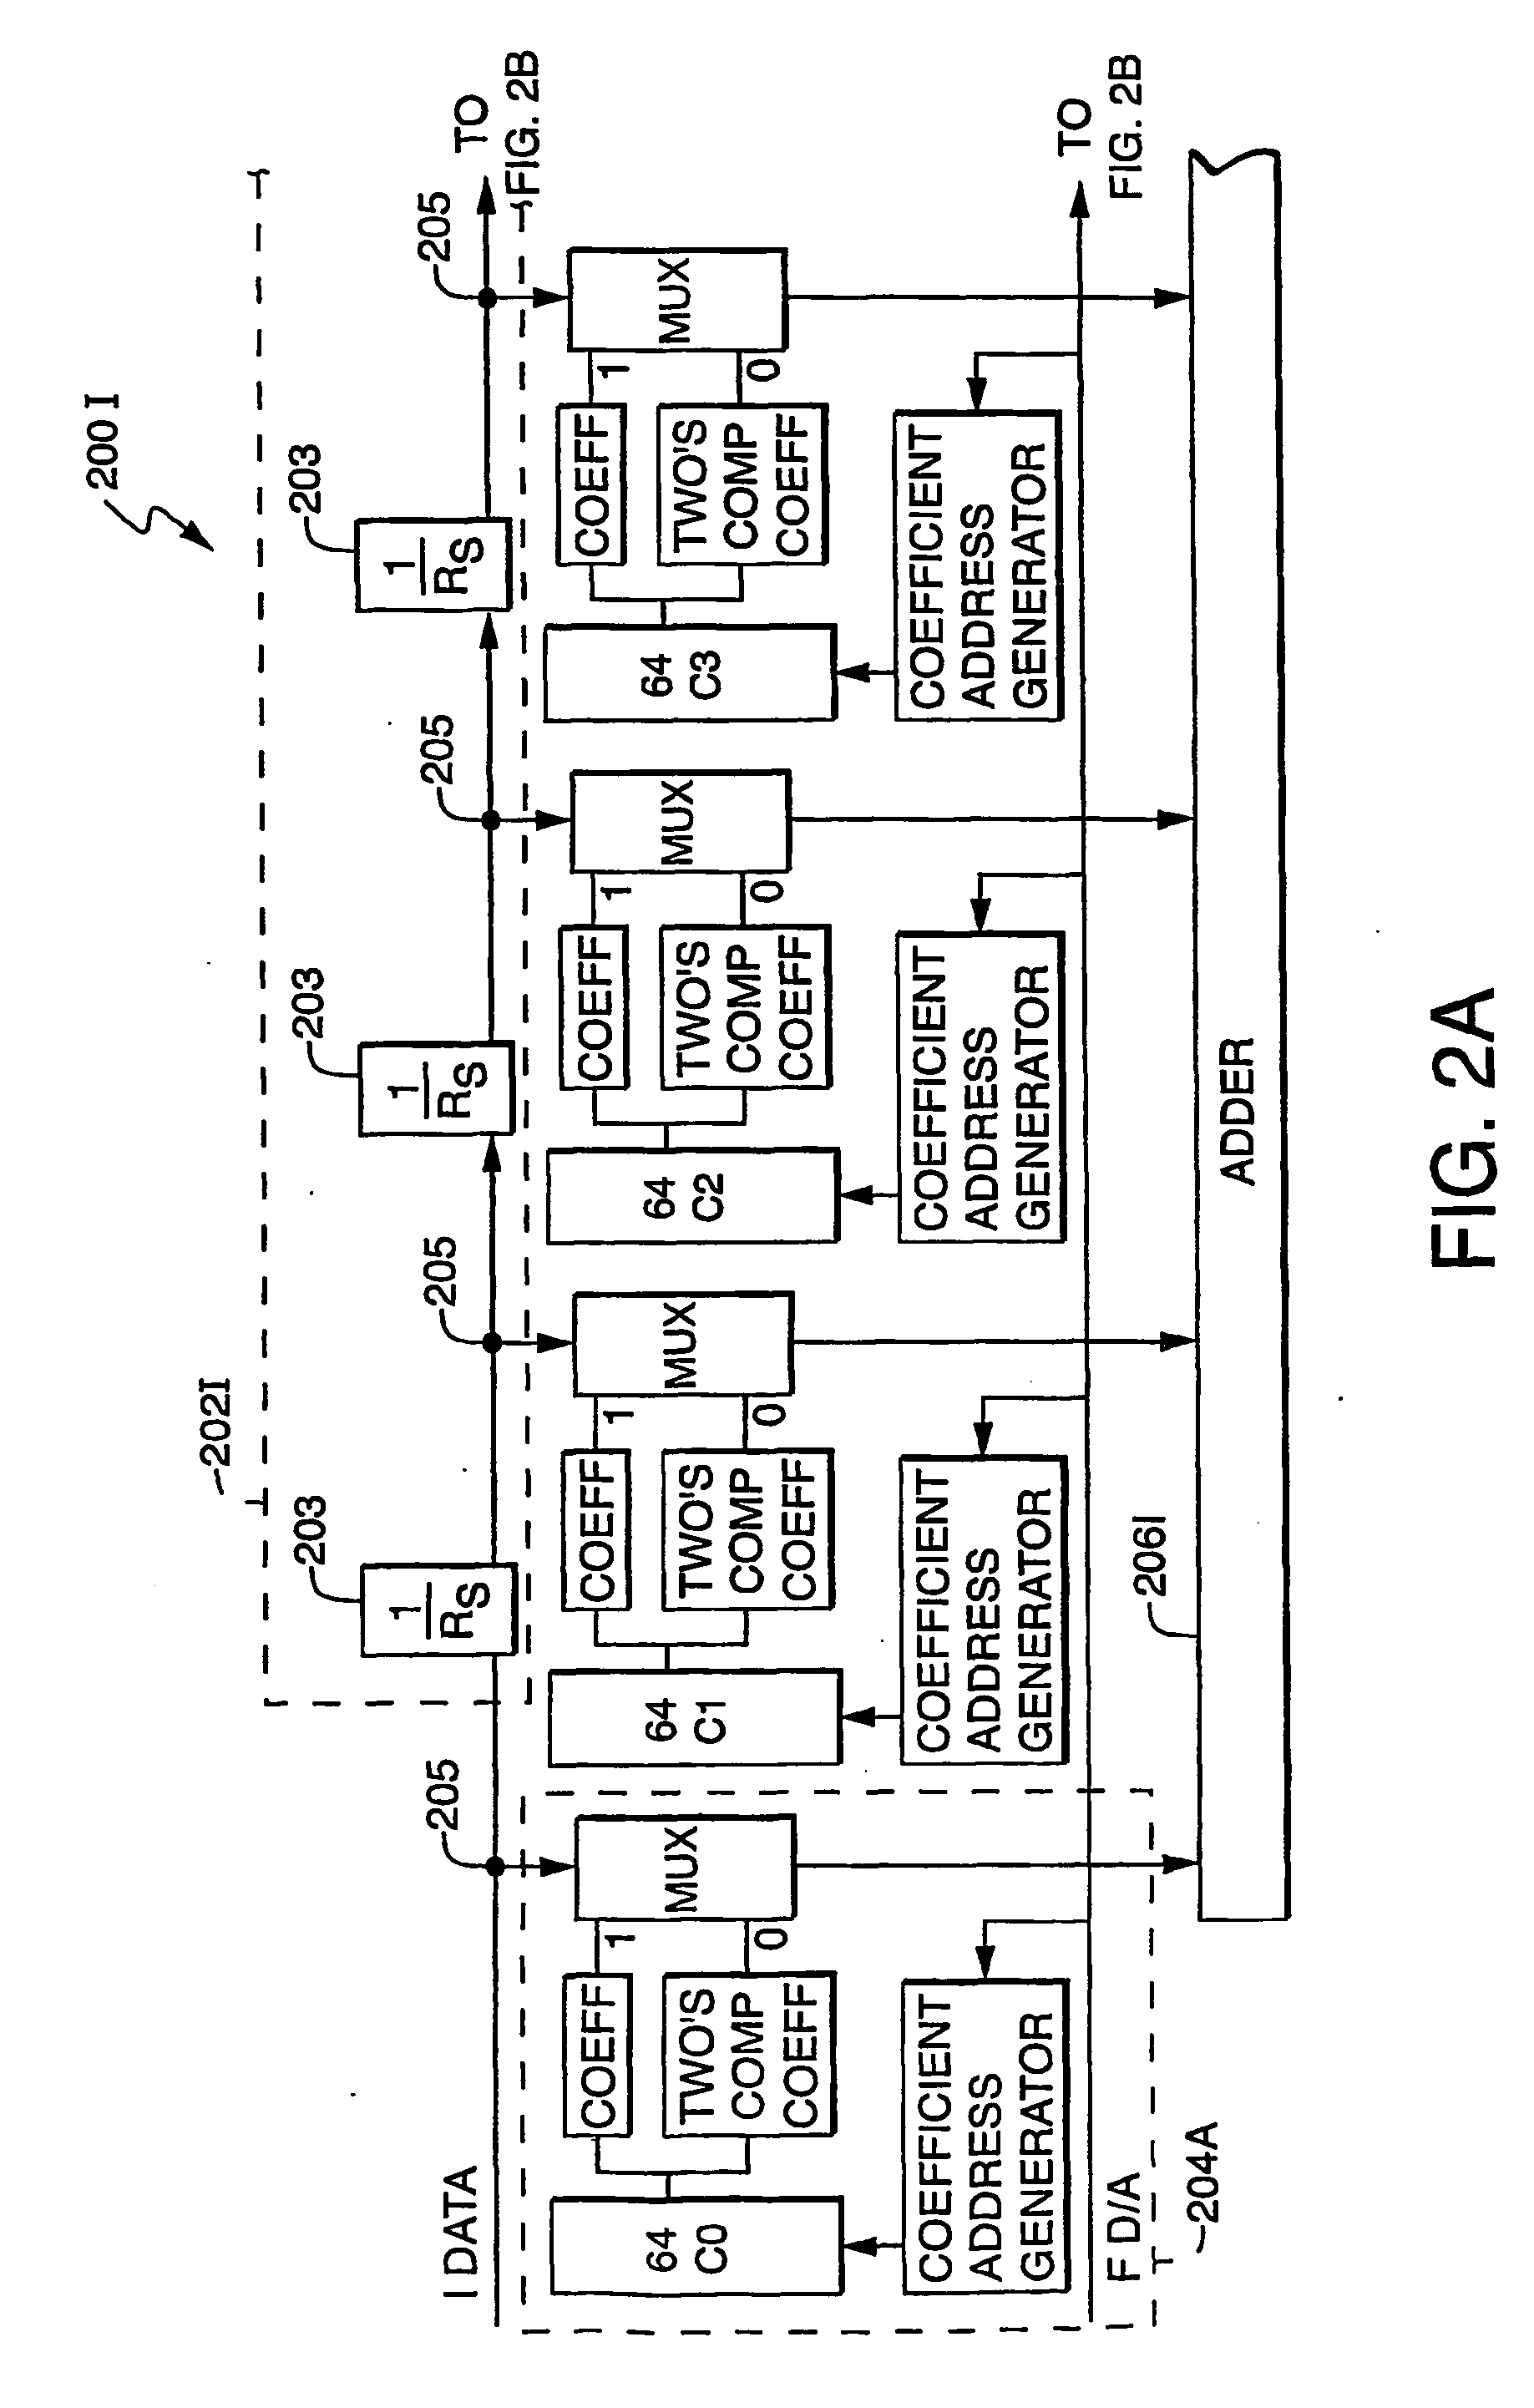 Method and device for pulse shaping qpsk signals